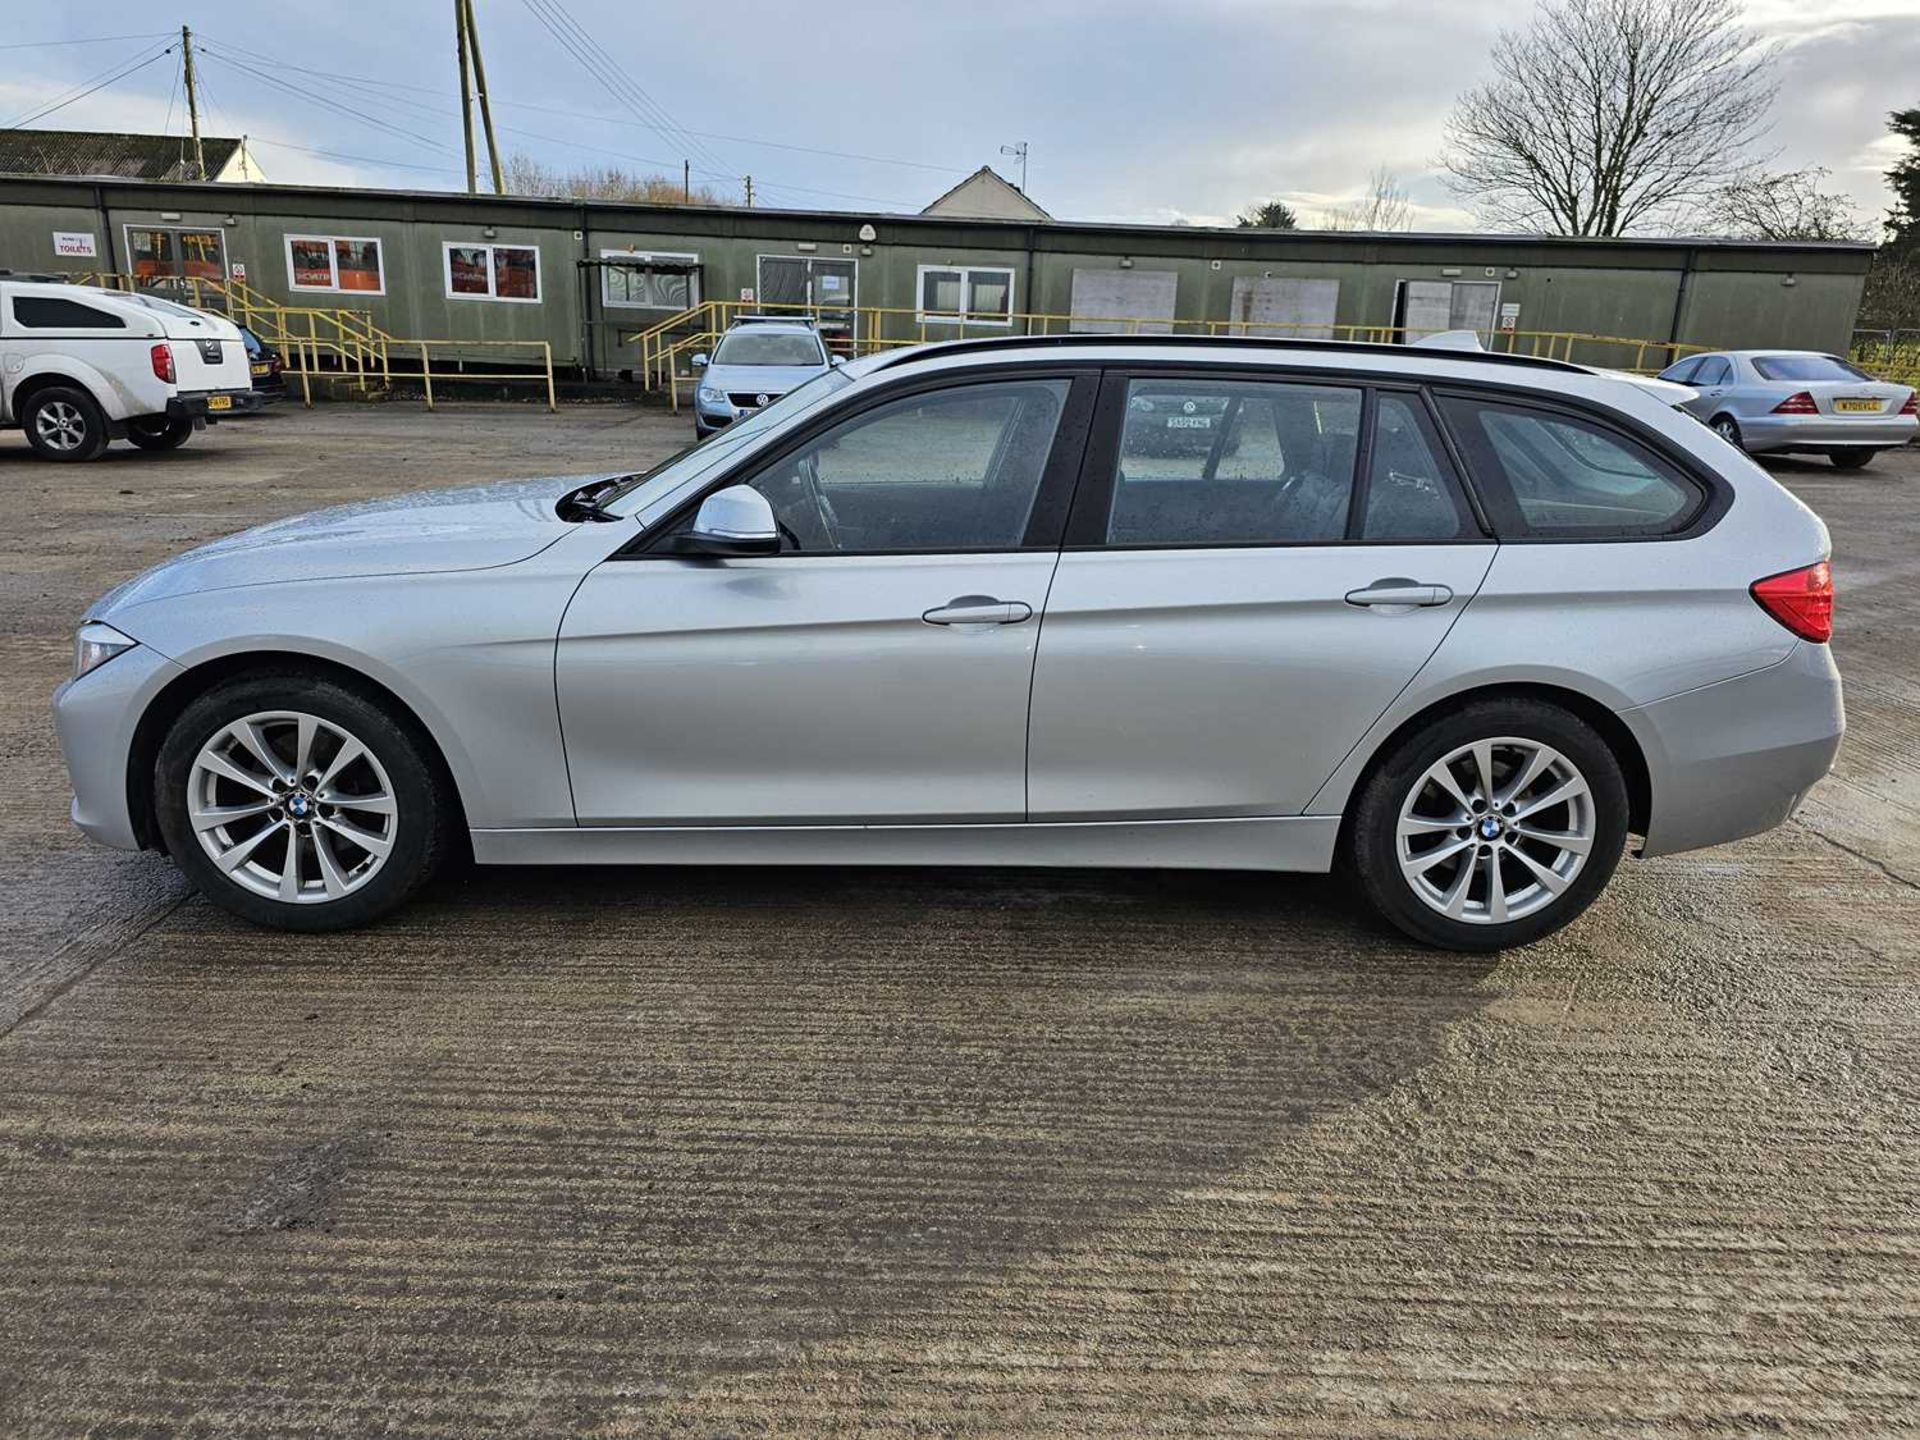 2013 BMW 320D Estate, Auto, Parking Sensors, Full Leather, Heated Seats, Bluetooth, Cruise Control,  - Image 5 of 29